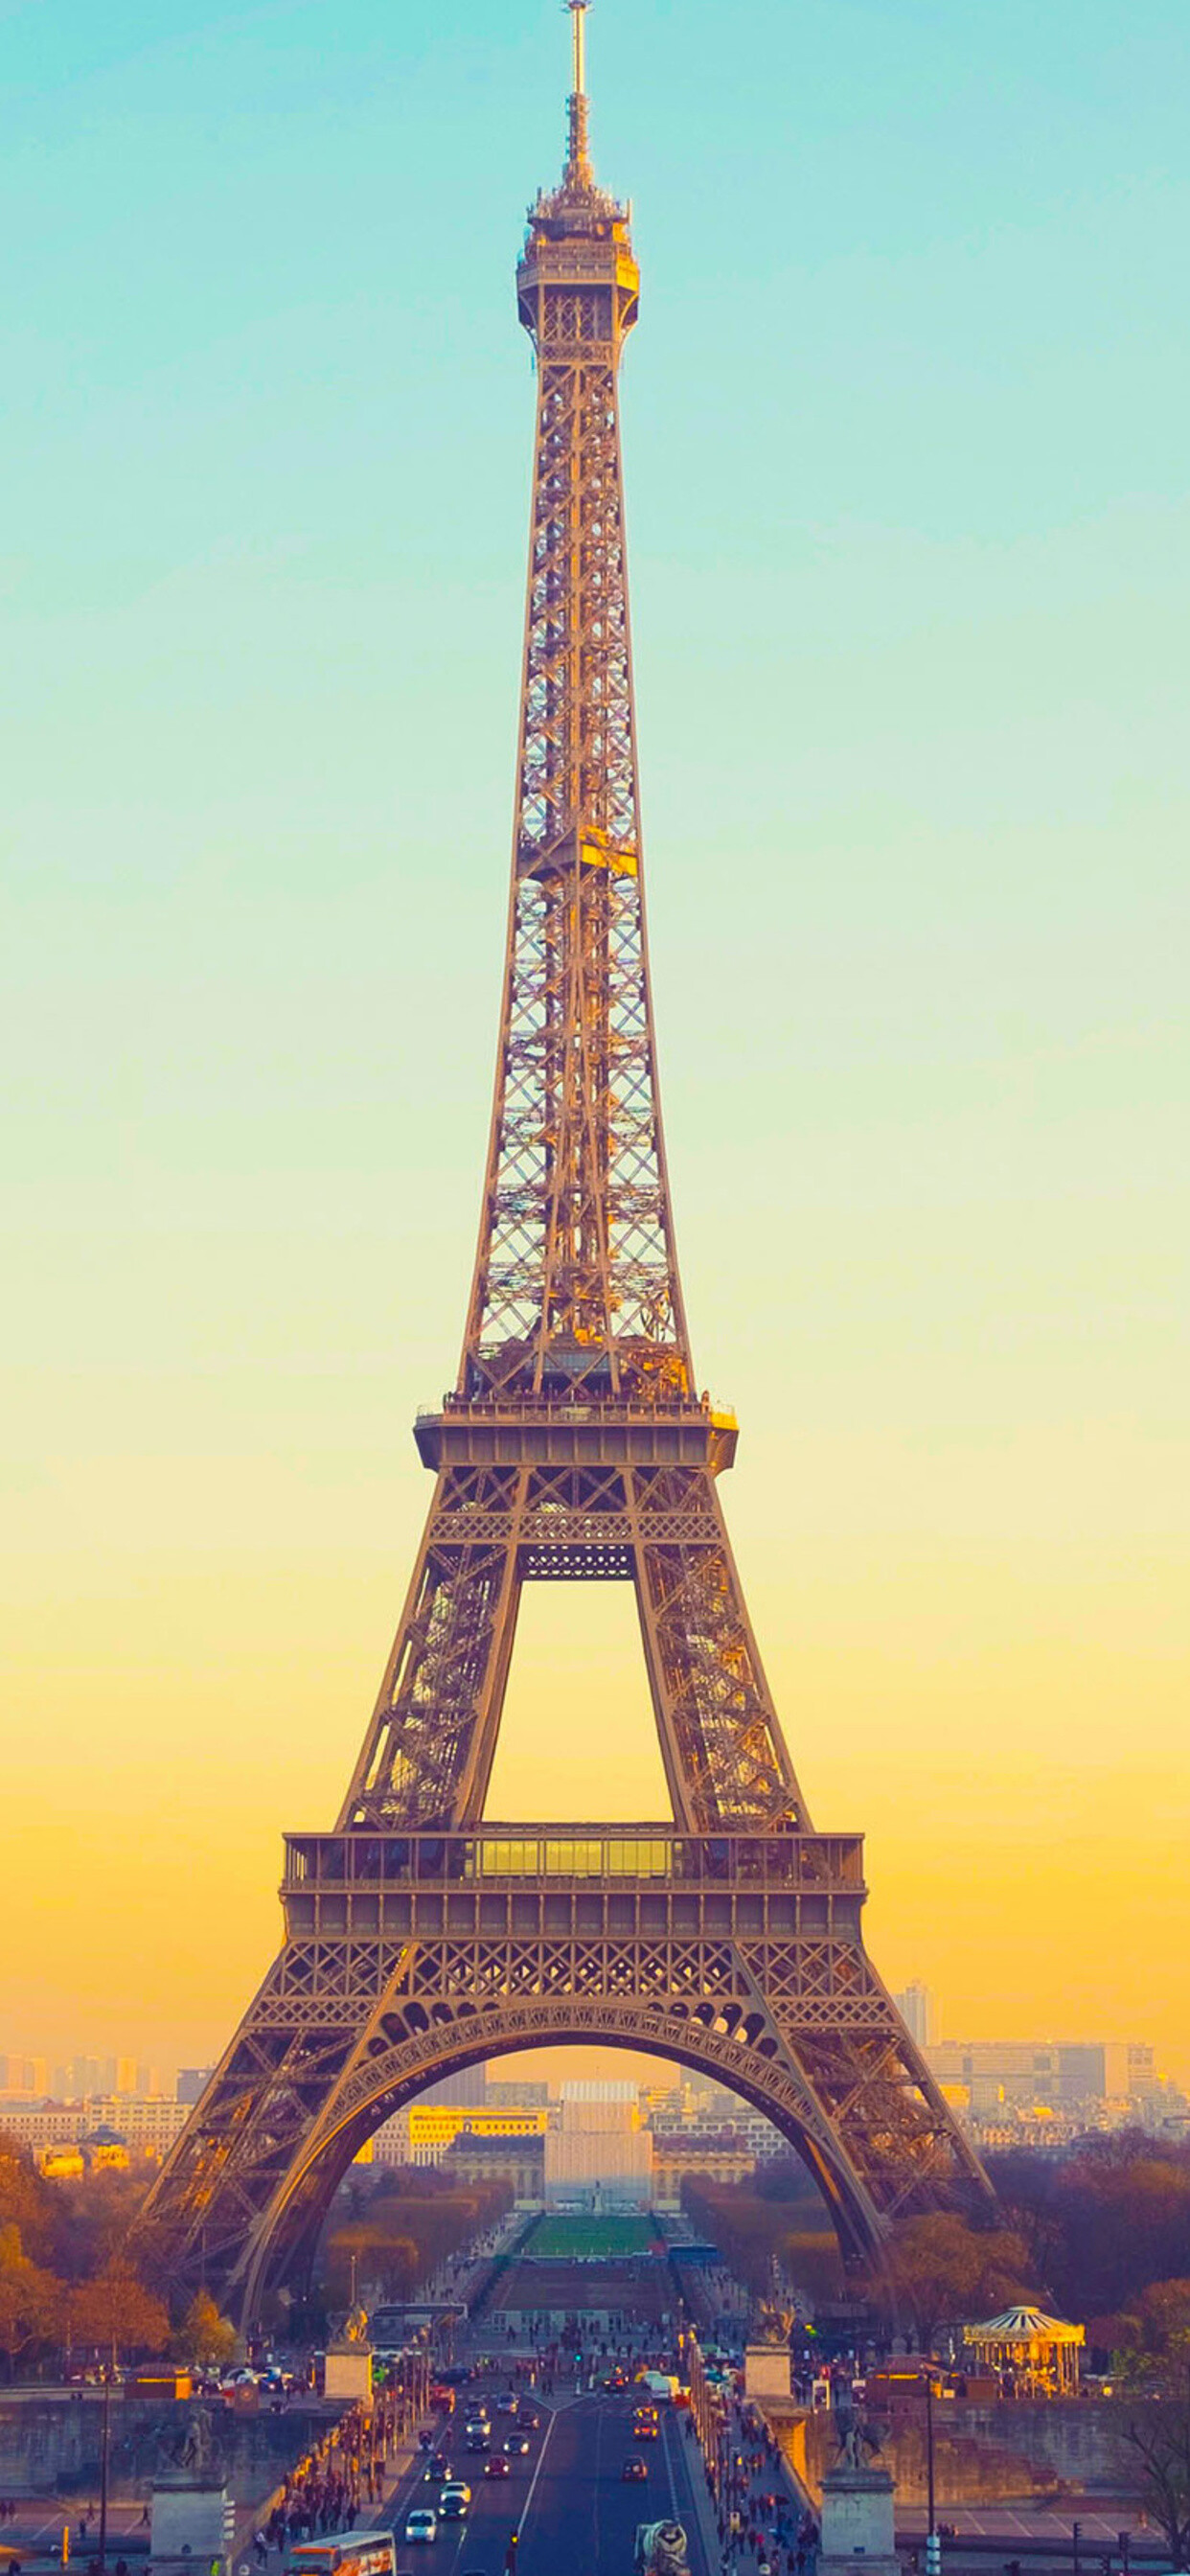 Eiffel Tower: French landmark, Known all over the world for its beautiful architecture and cultural significance. 1250x2690 HD Wallpaper.